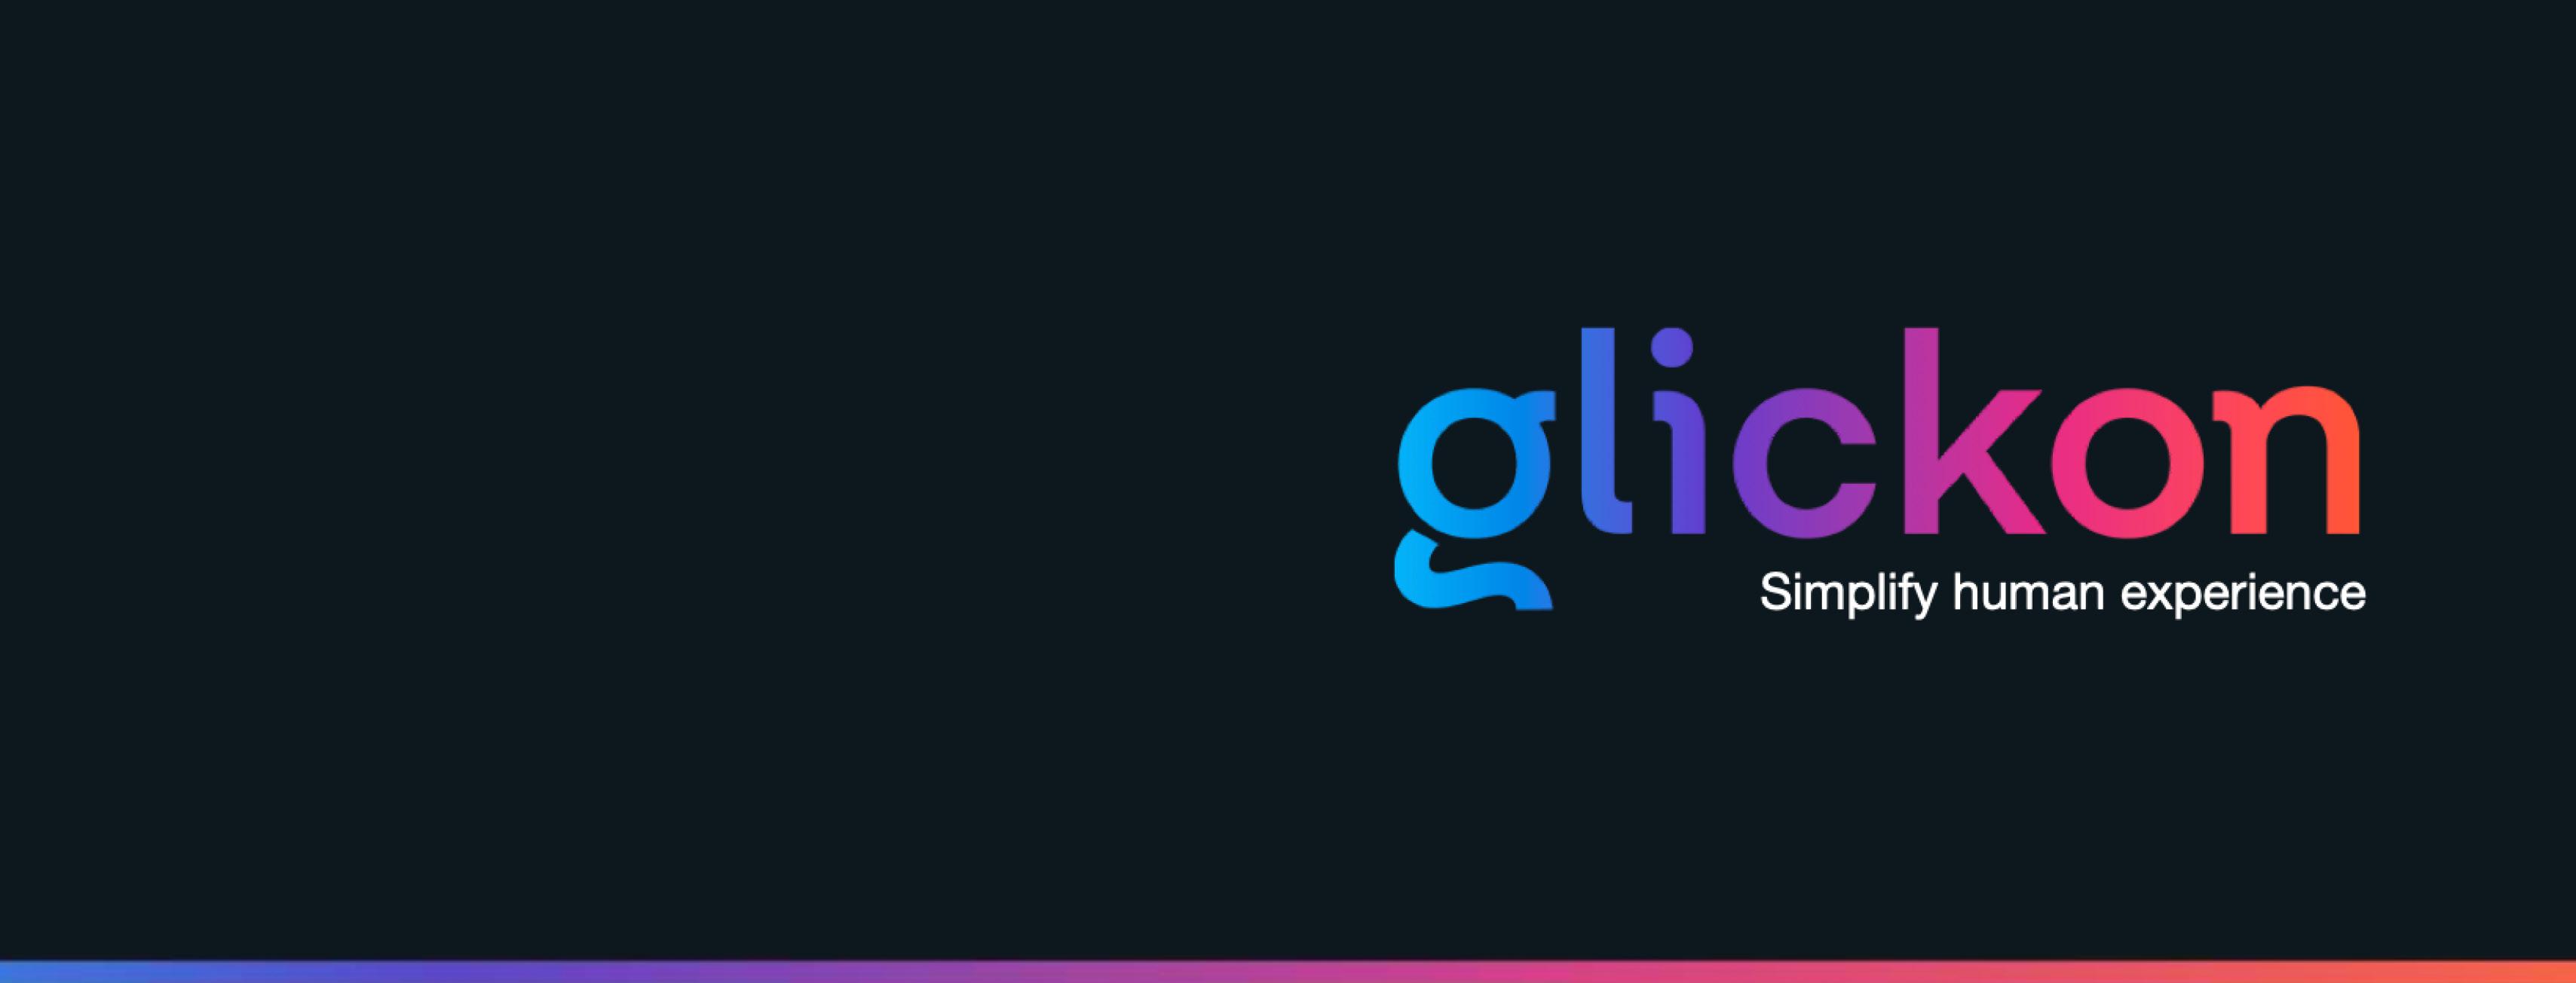 Review Glickon: Employee and Candidate Engagement Platform: work made simple - Appvizer